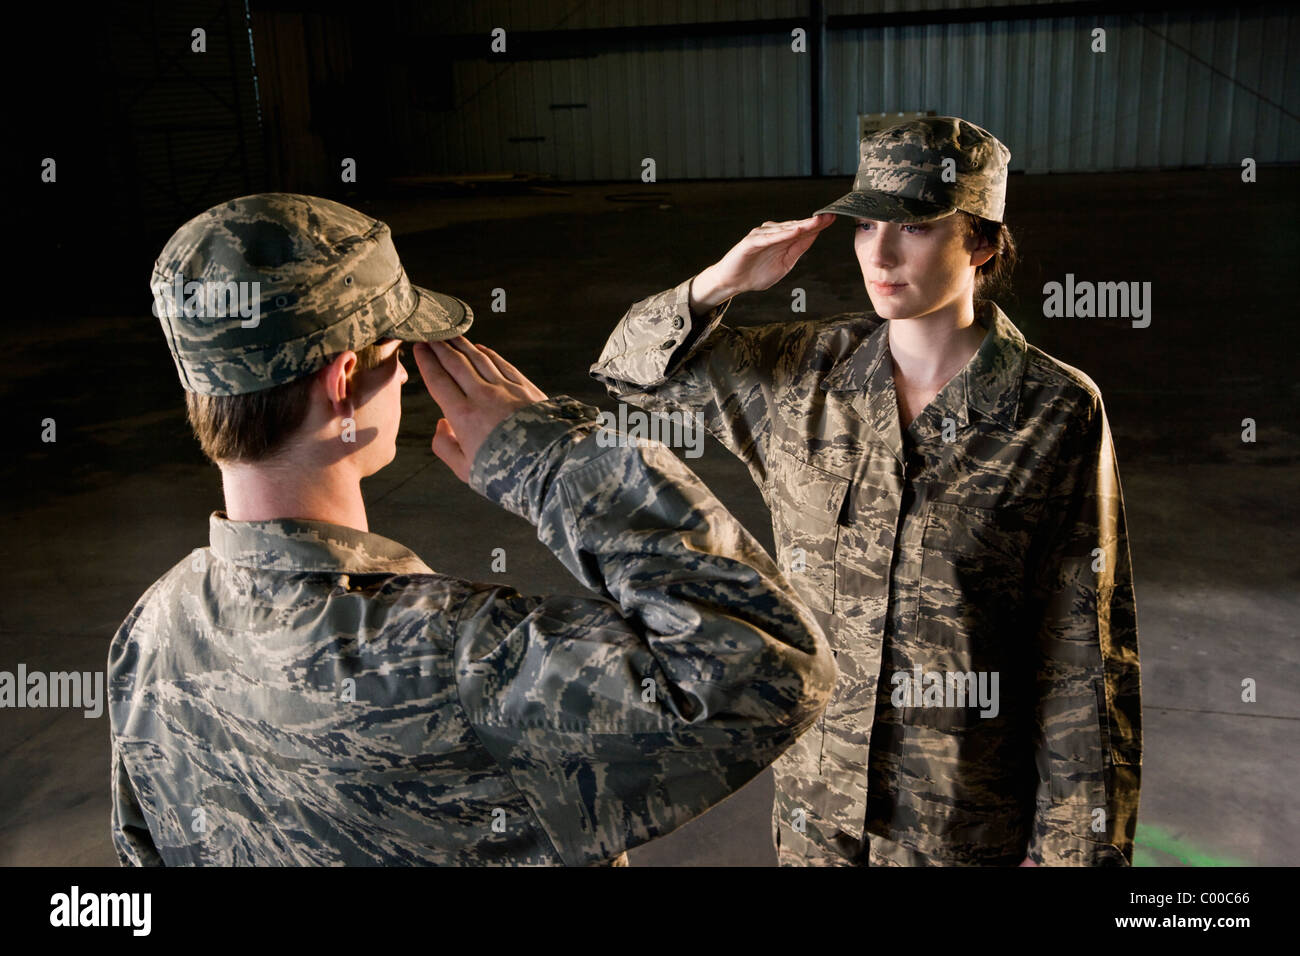 Soldiers in army combat uniform saluting Stock Photo